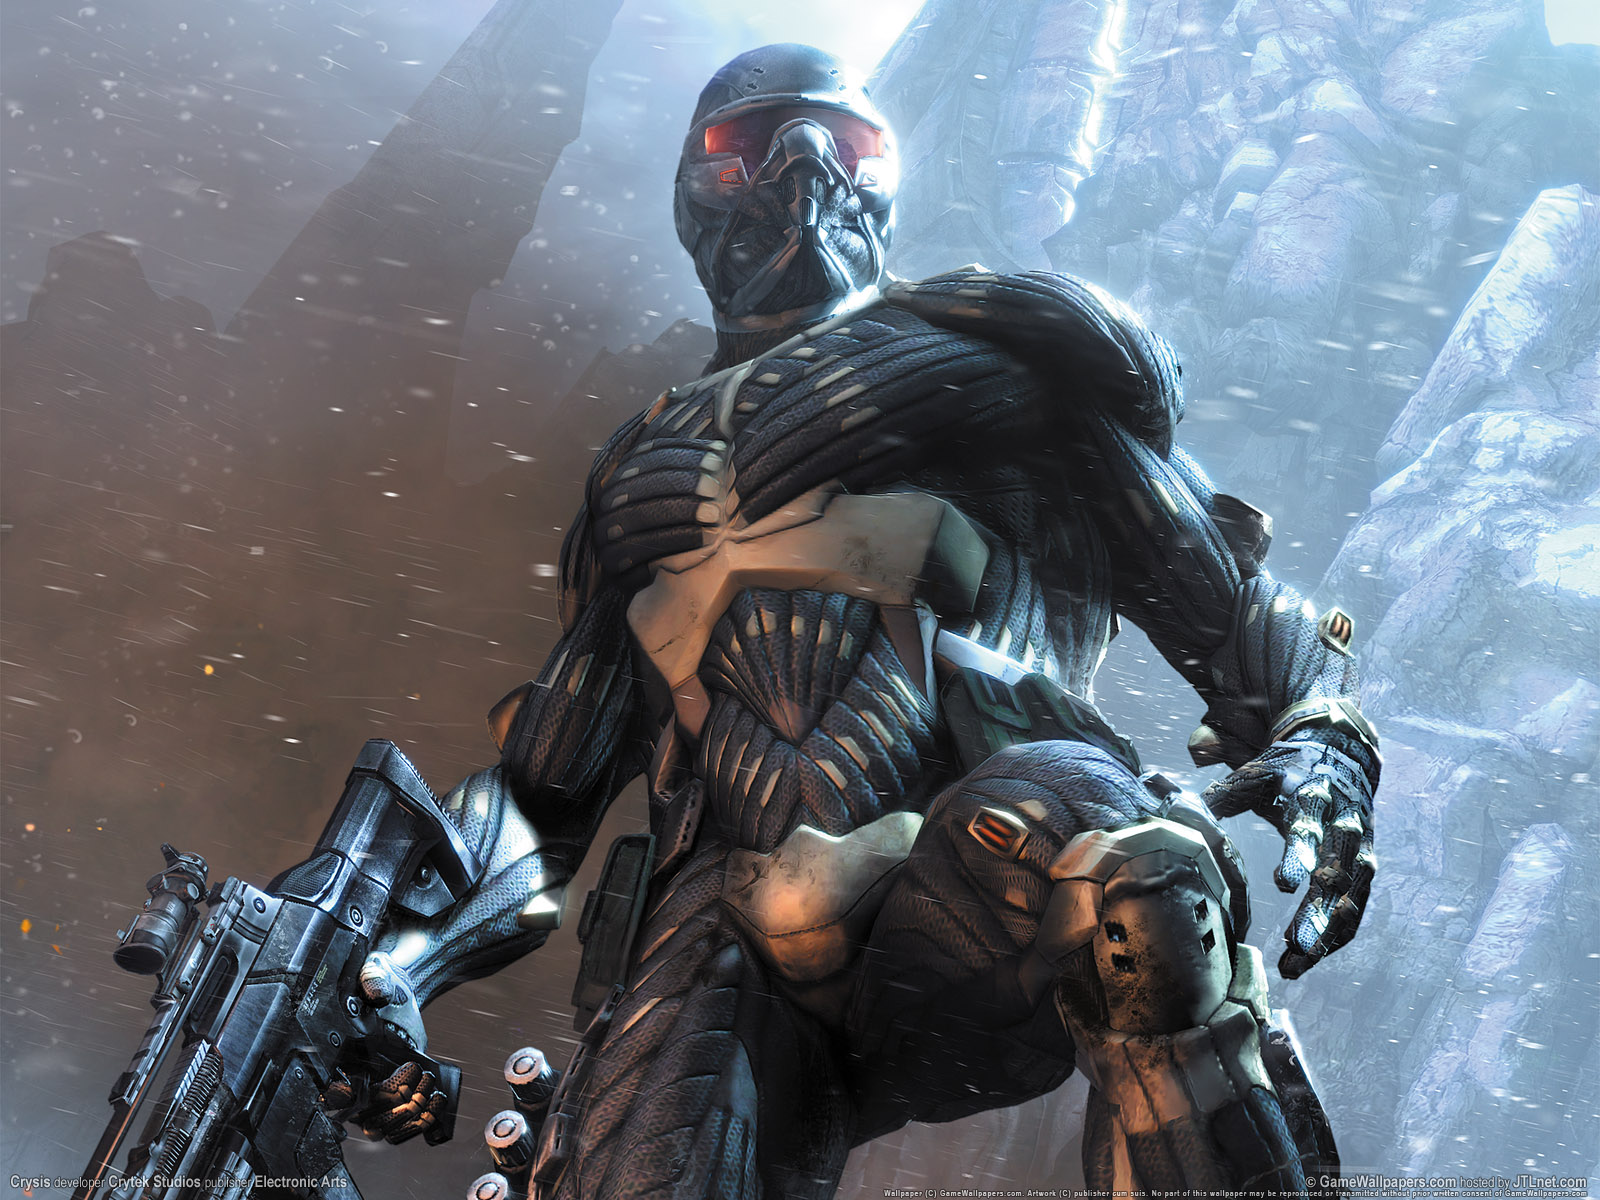 Nerd Full HD Crysis Wallpaper Here You Can See